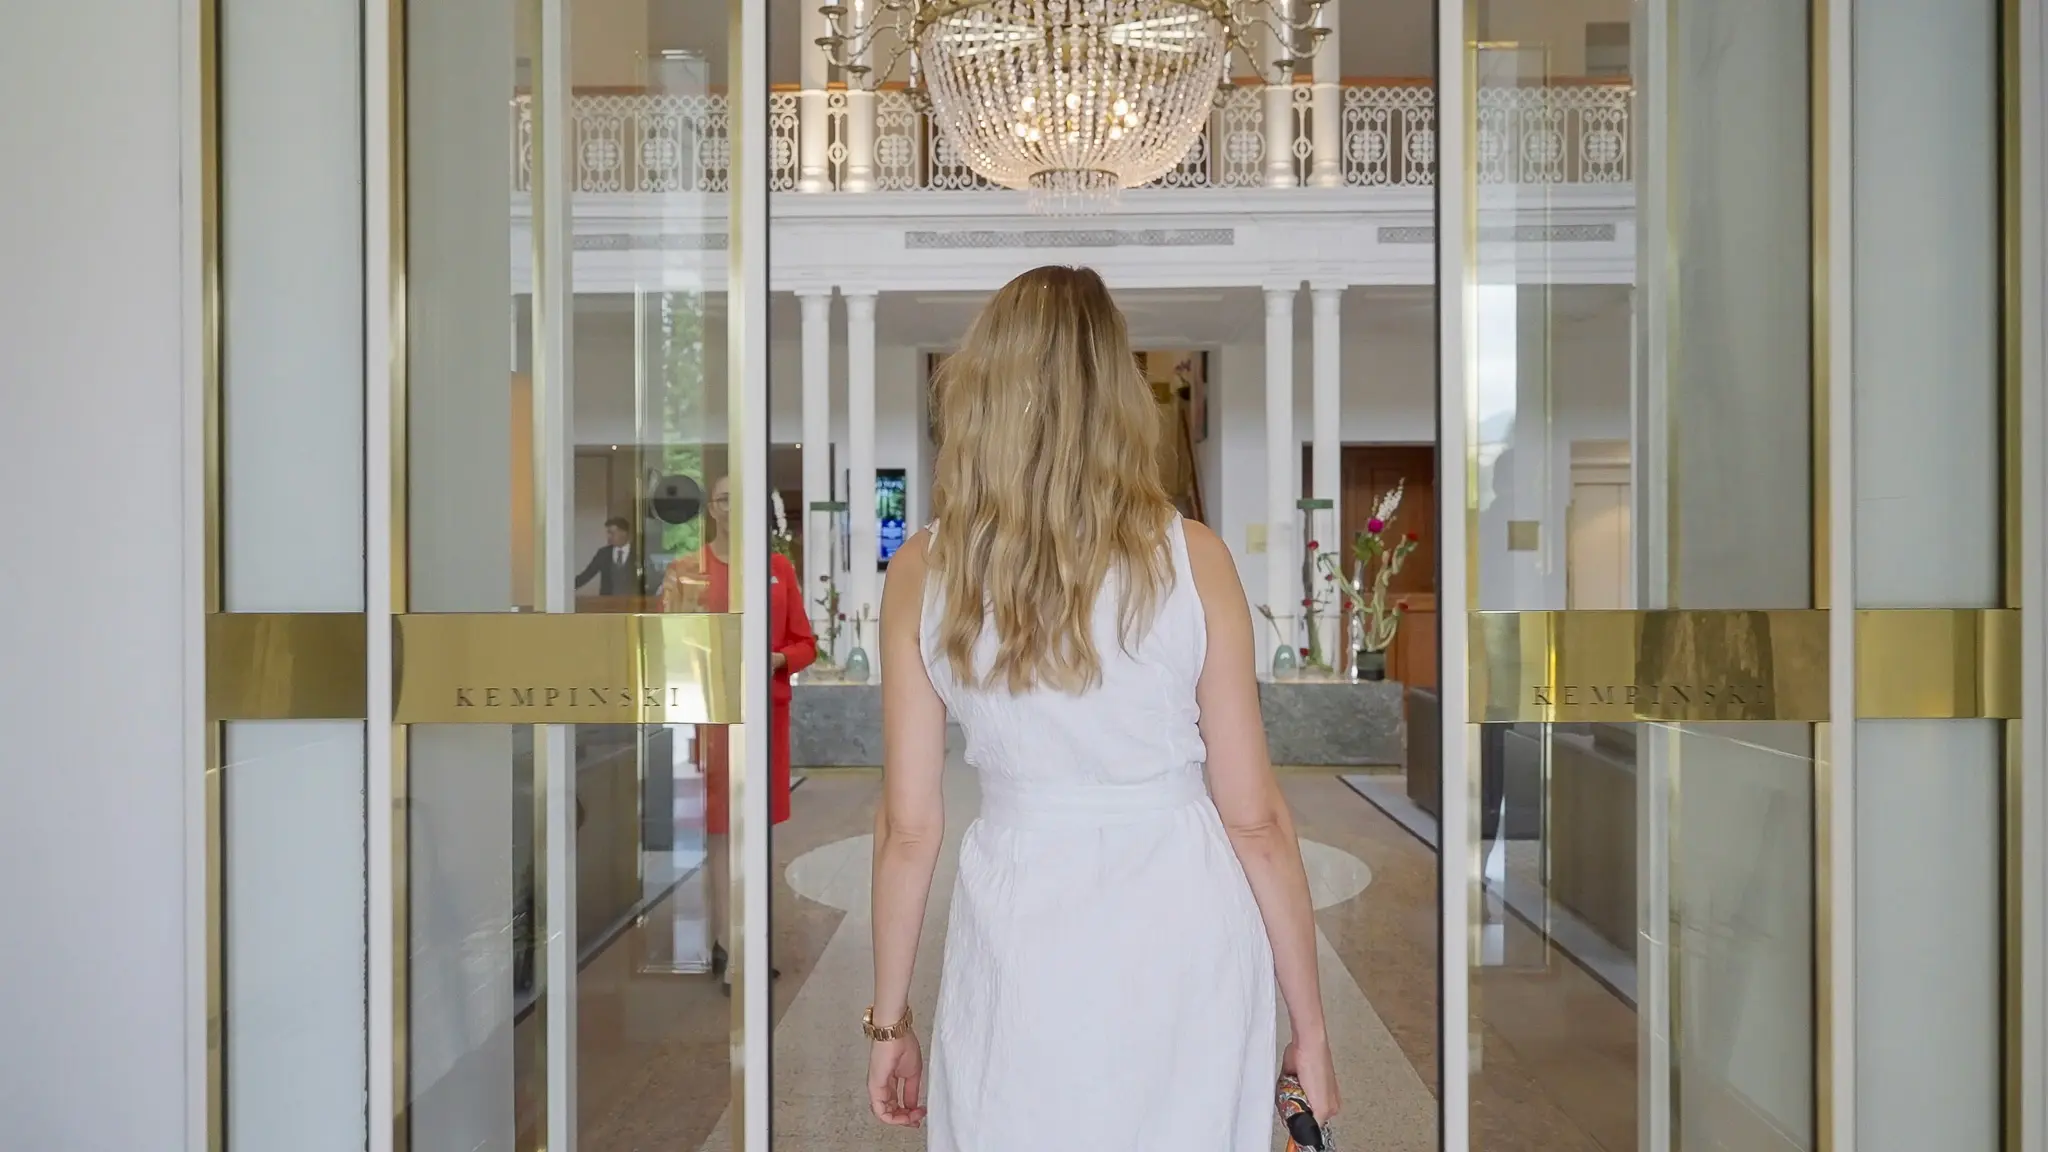 Woman in white dress entering hotel